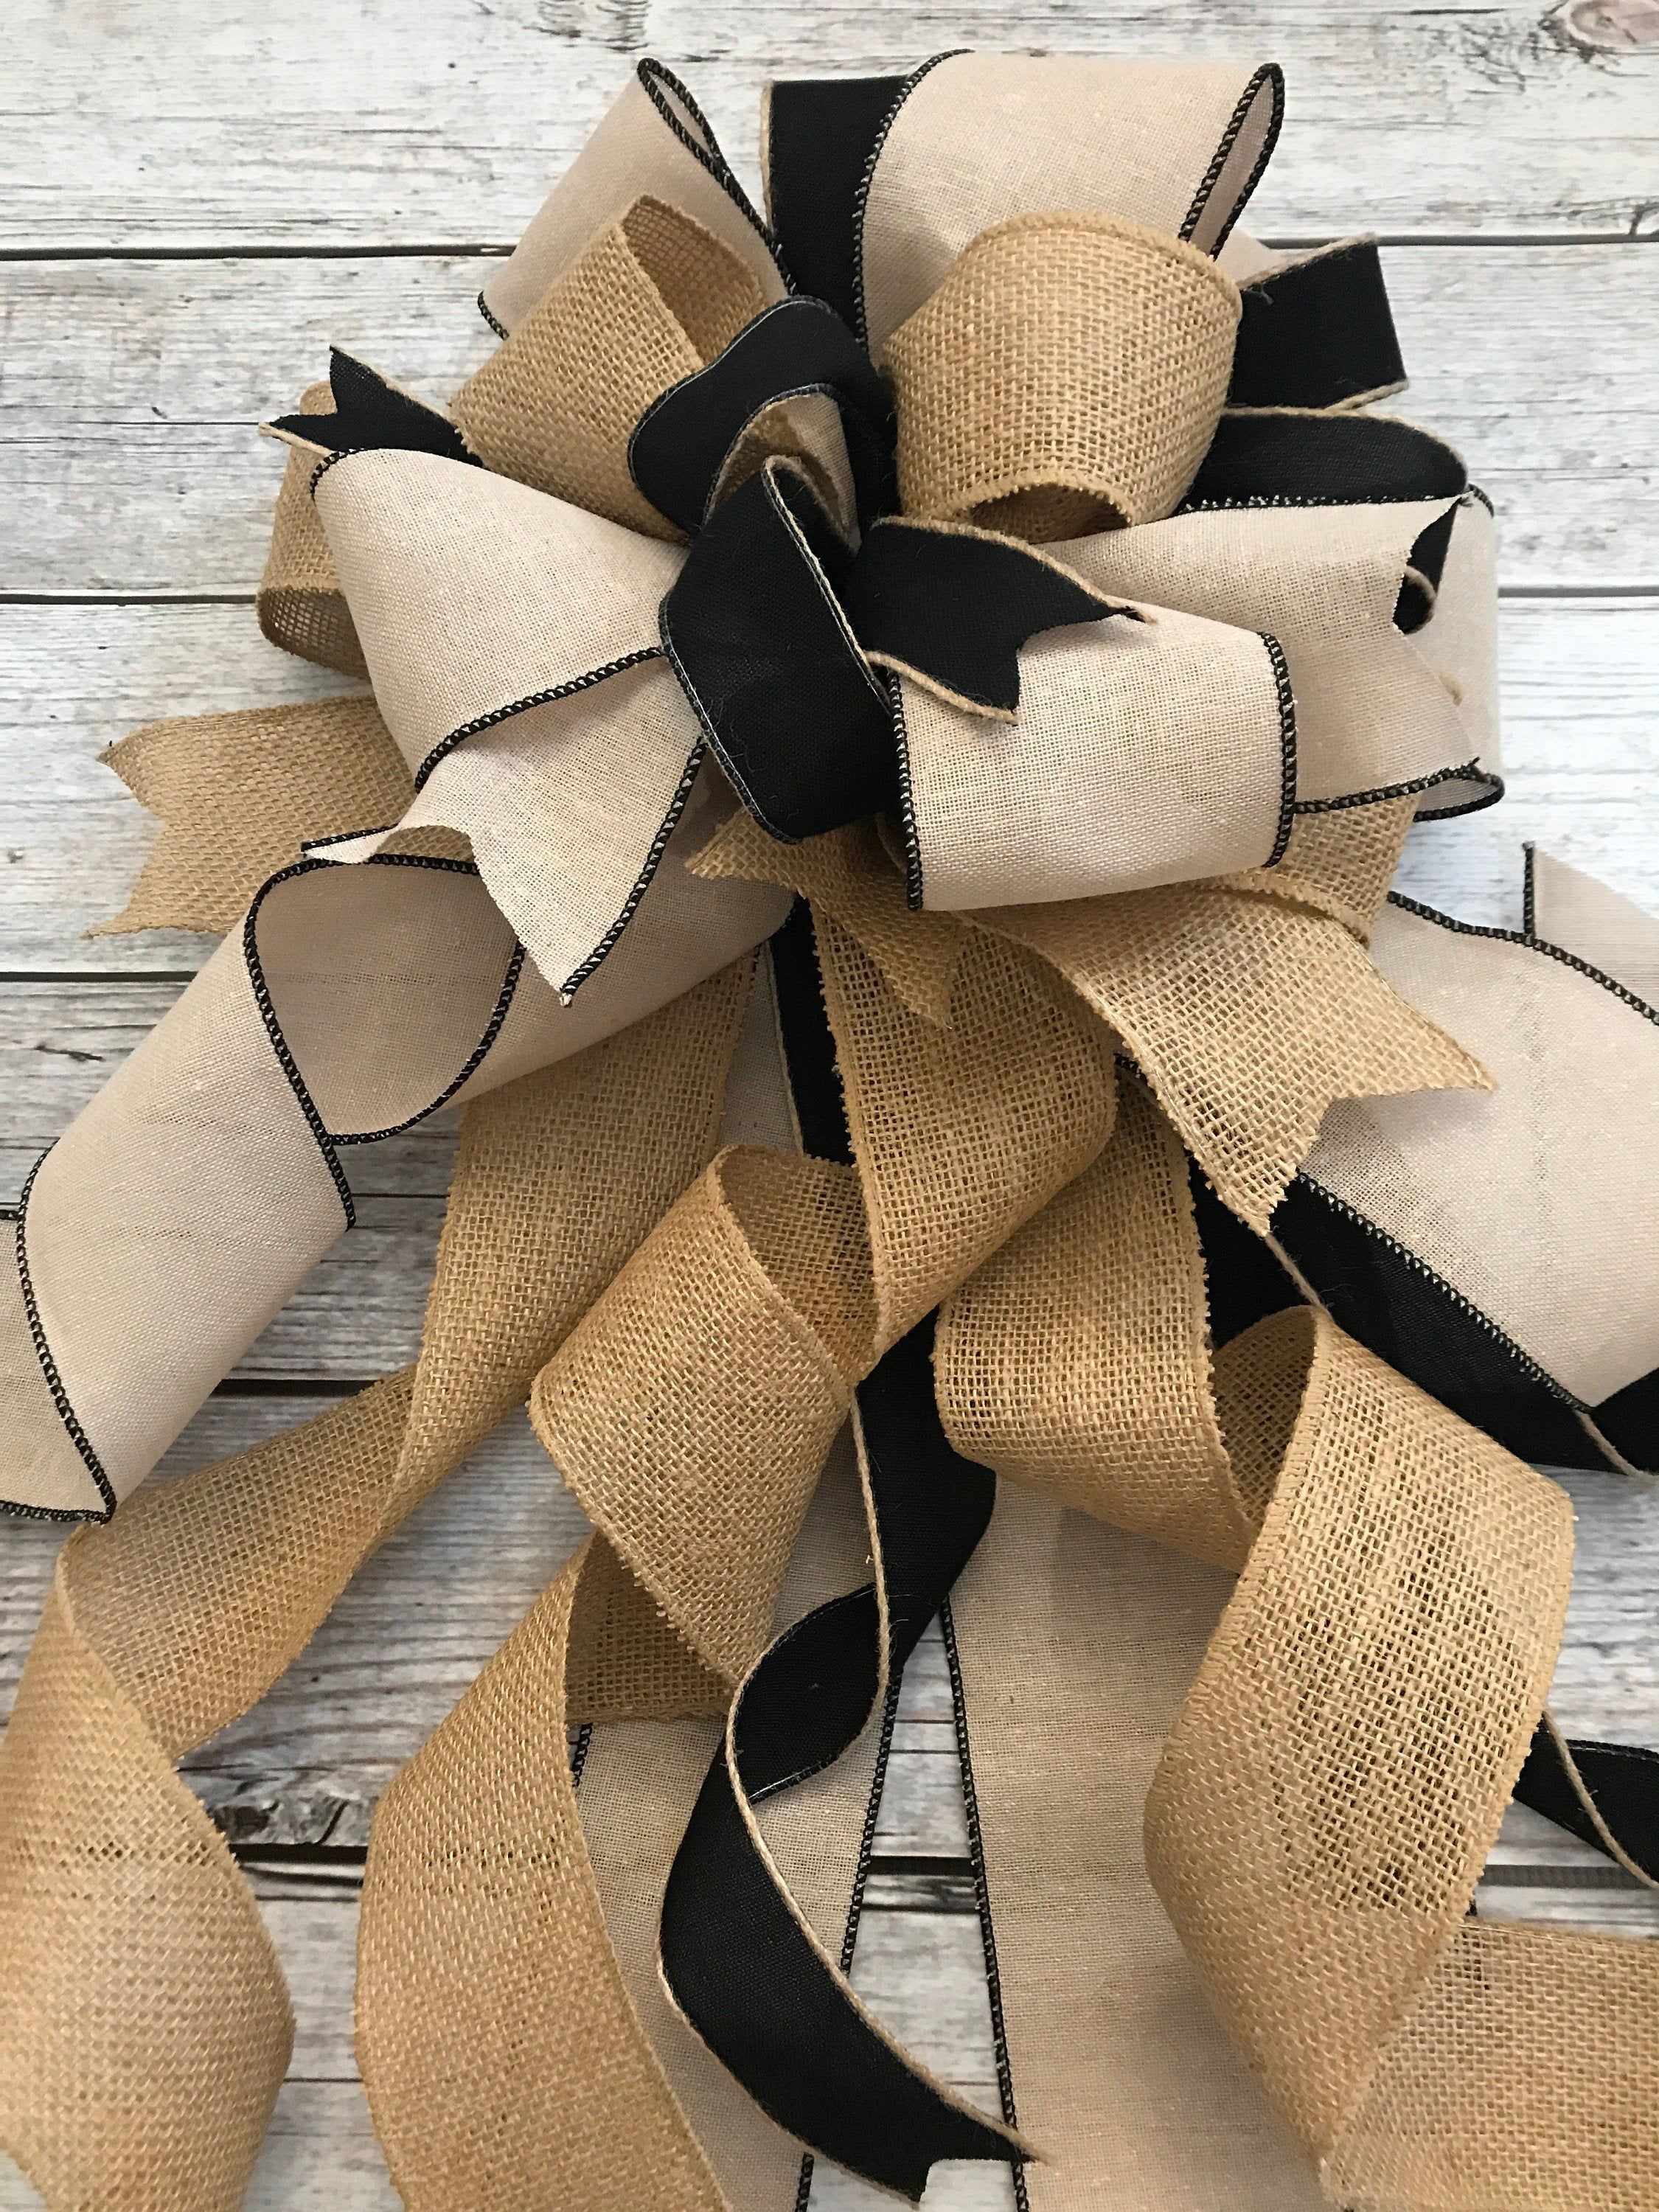 Burlap and Black Christmas Tree Topper bowWreath BowSwag | Etsy -   14 rustic christmas tree topper burlap bows ideas